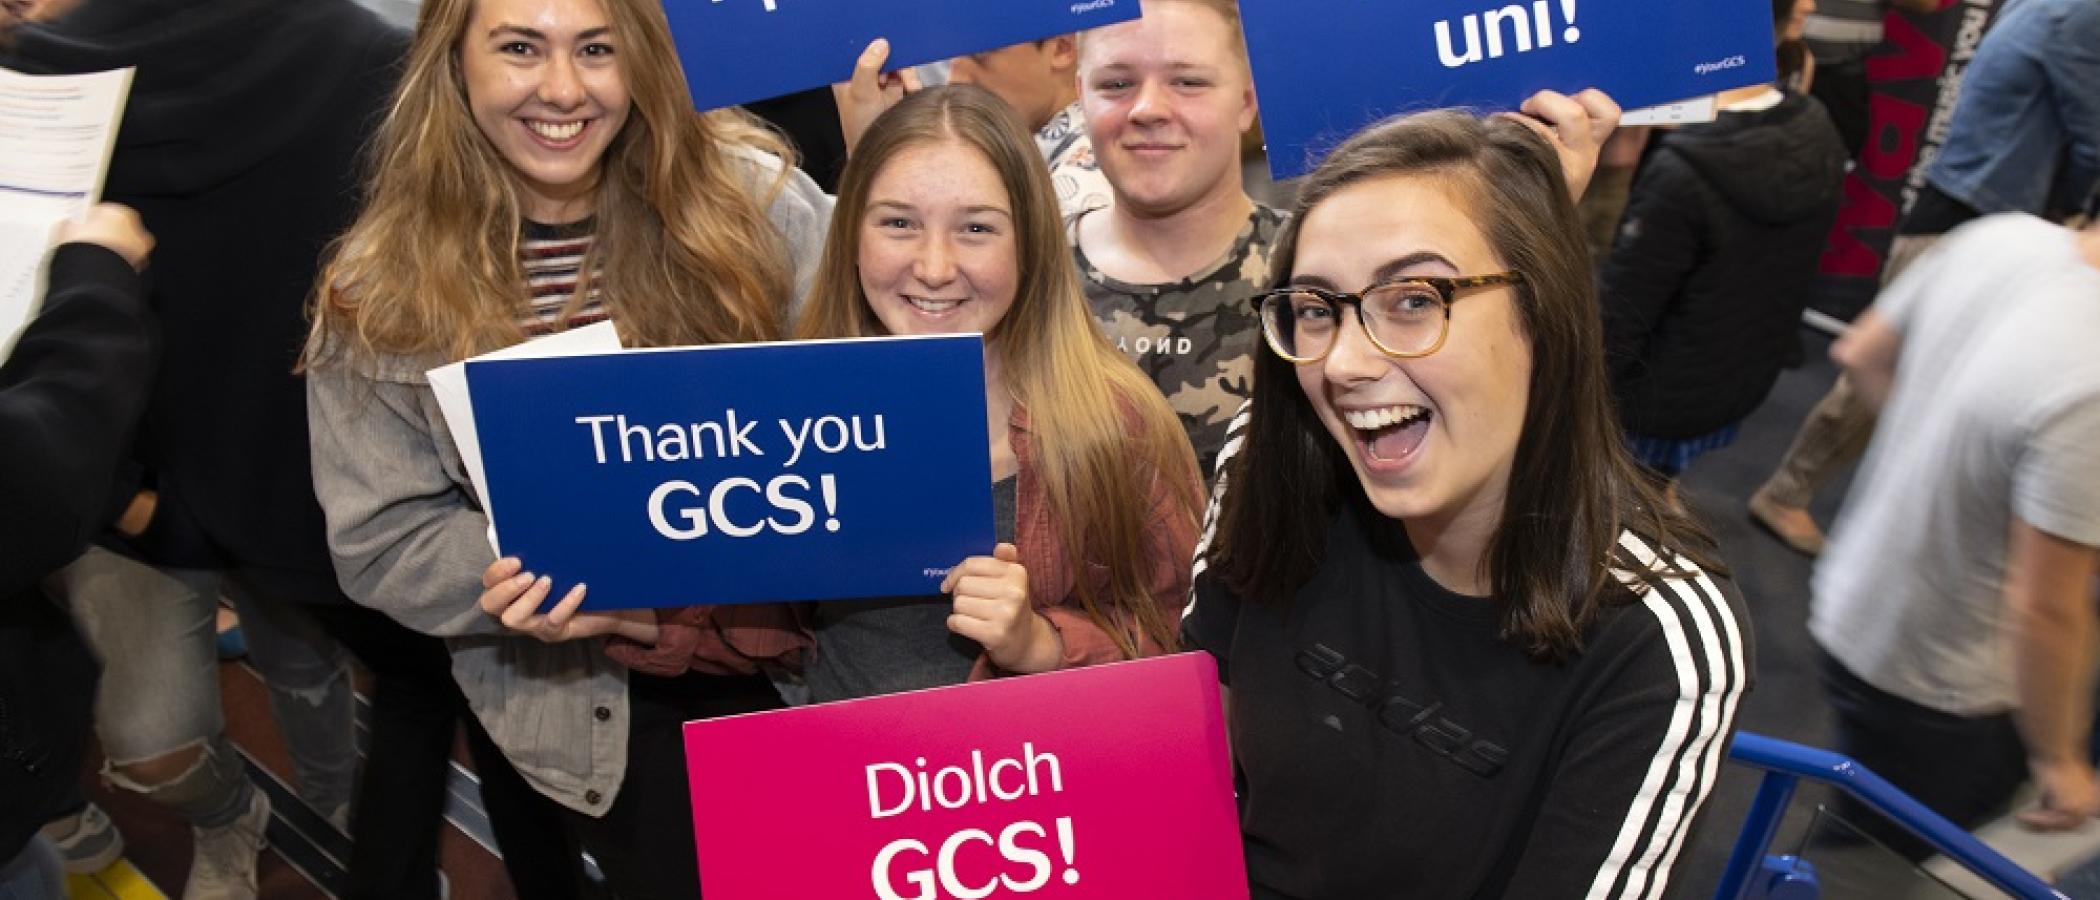 Top results for Gower College Swansea